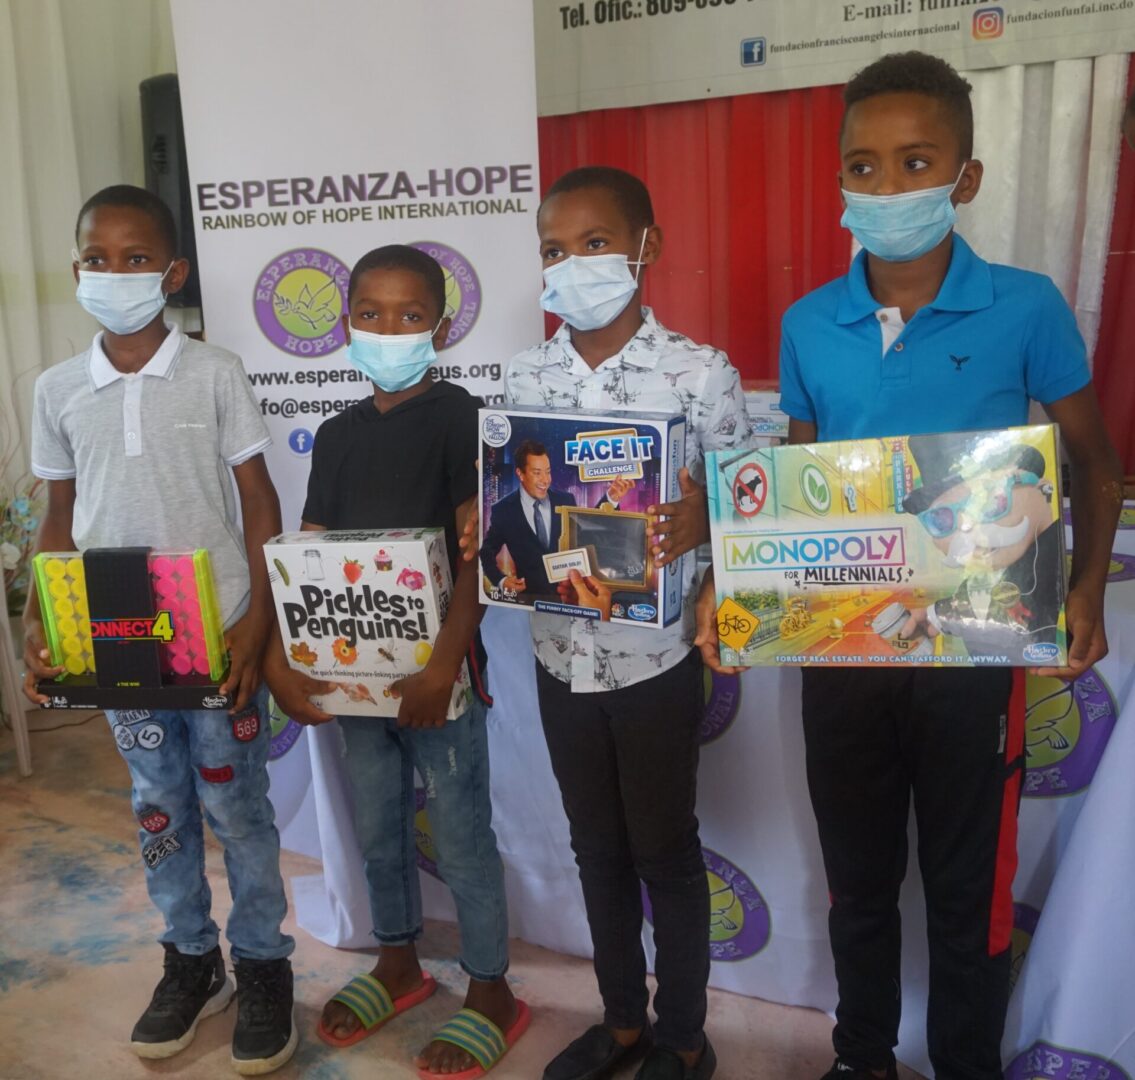 Four boys wearing masks, all holding a board game box